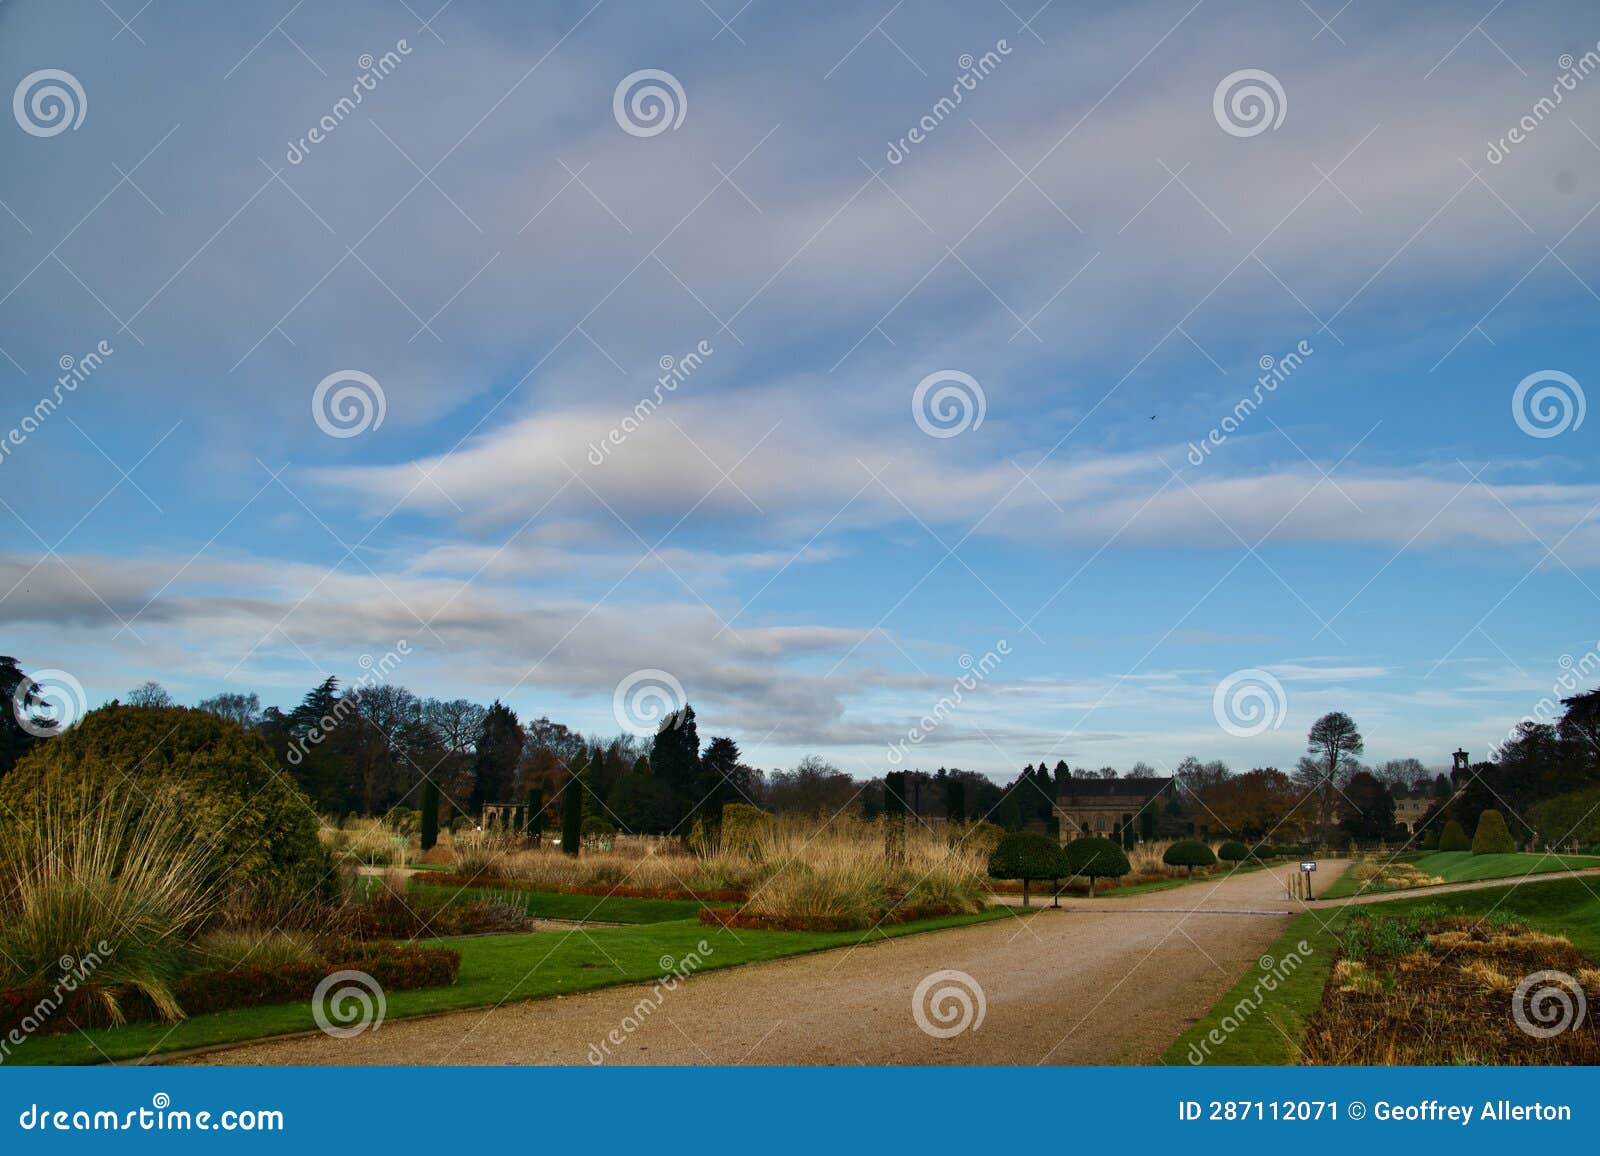 Down the Pathway on a Winter Morning Stock Image - Image of morning ...